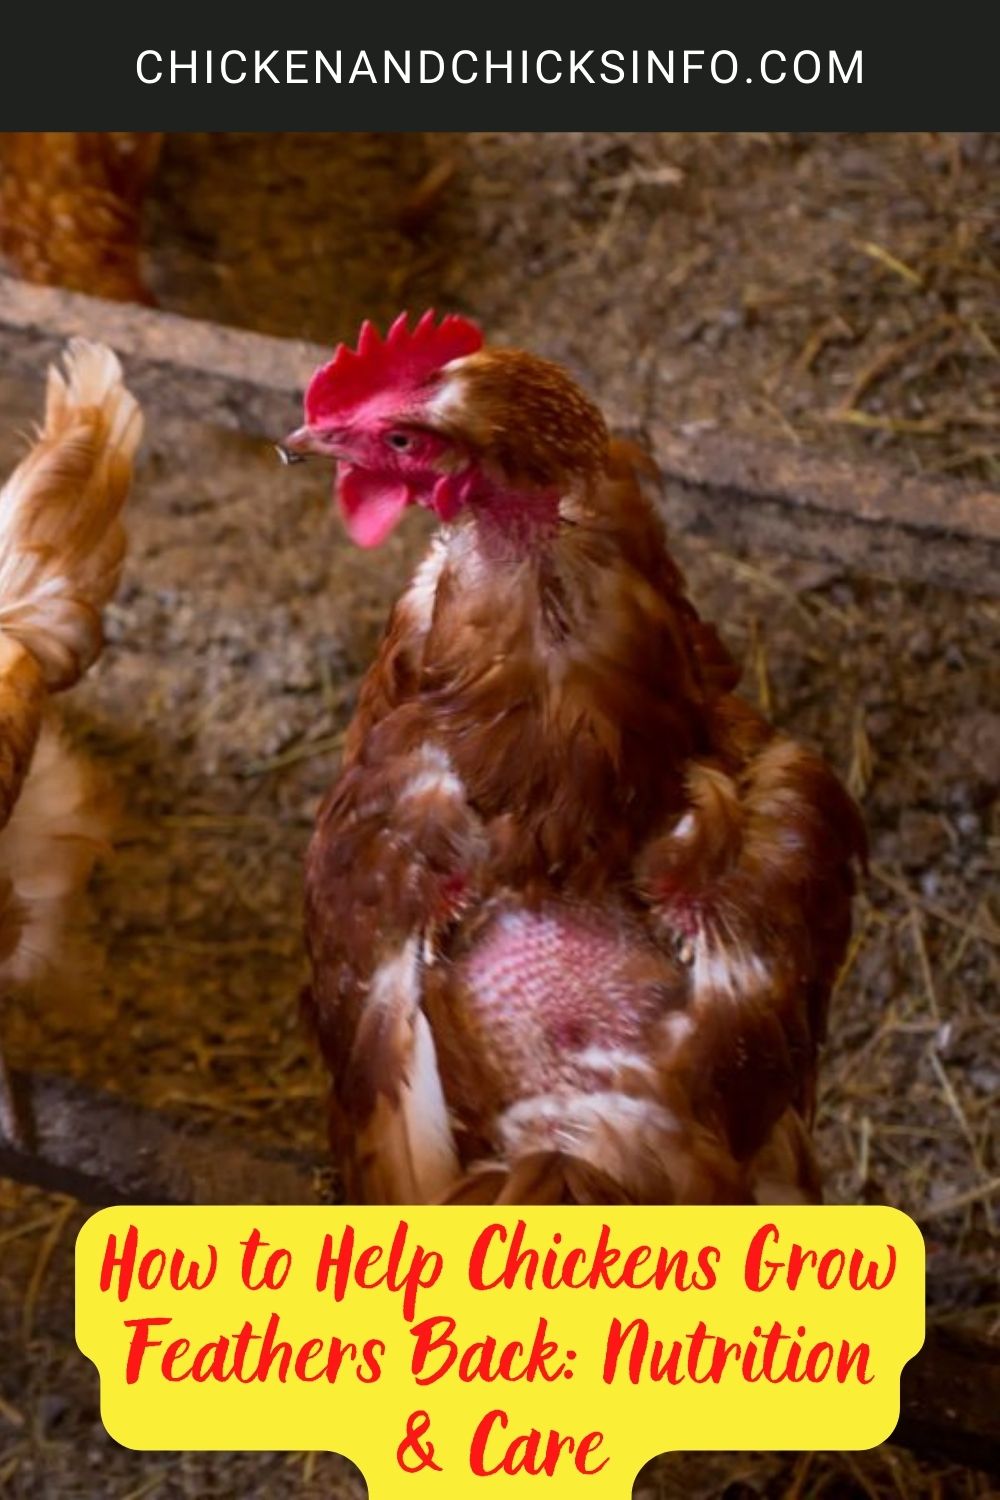 How to Help Chickens Grow Feathers Back: Nutrition & Care poster.